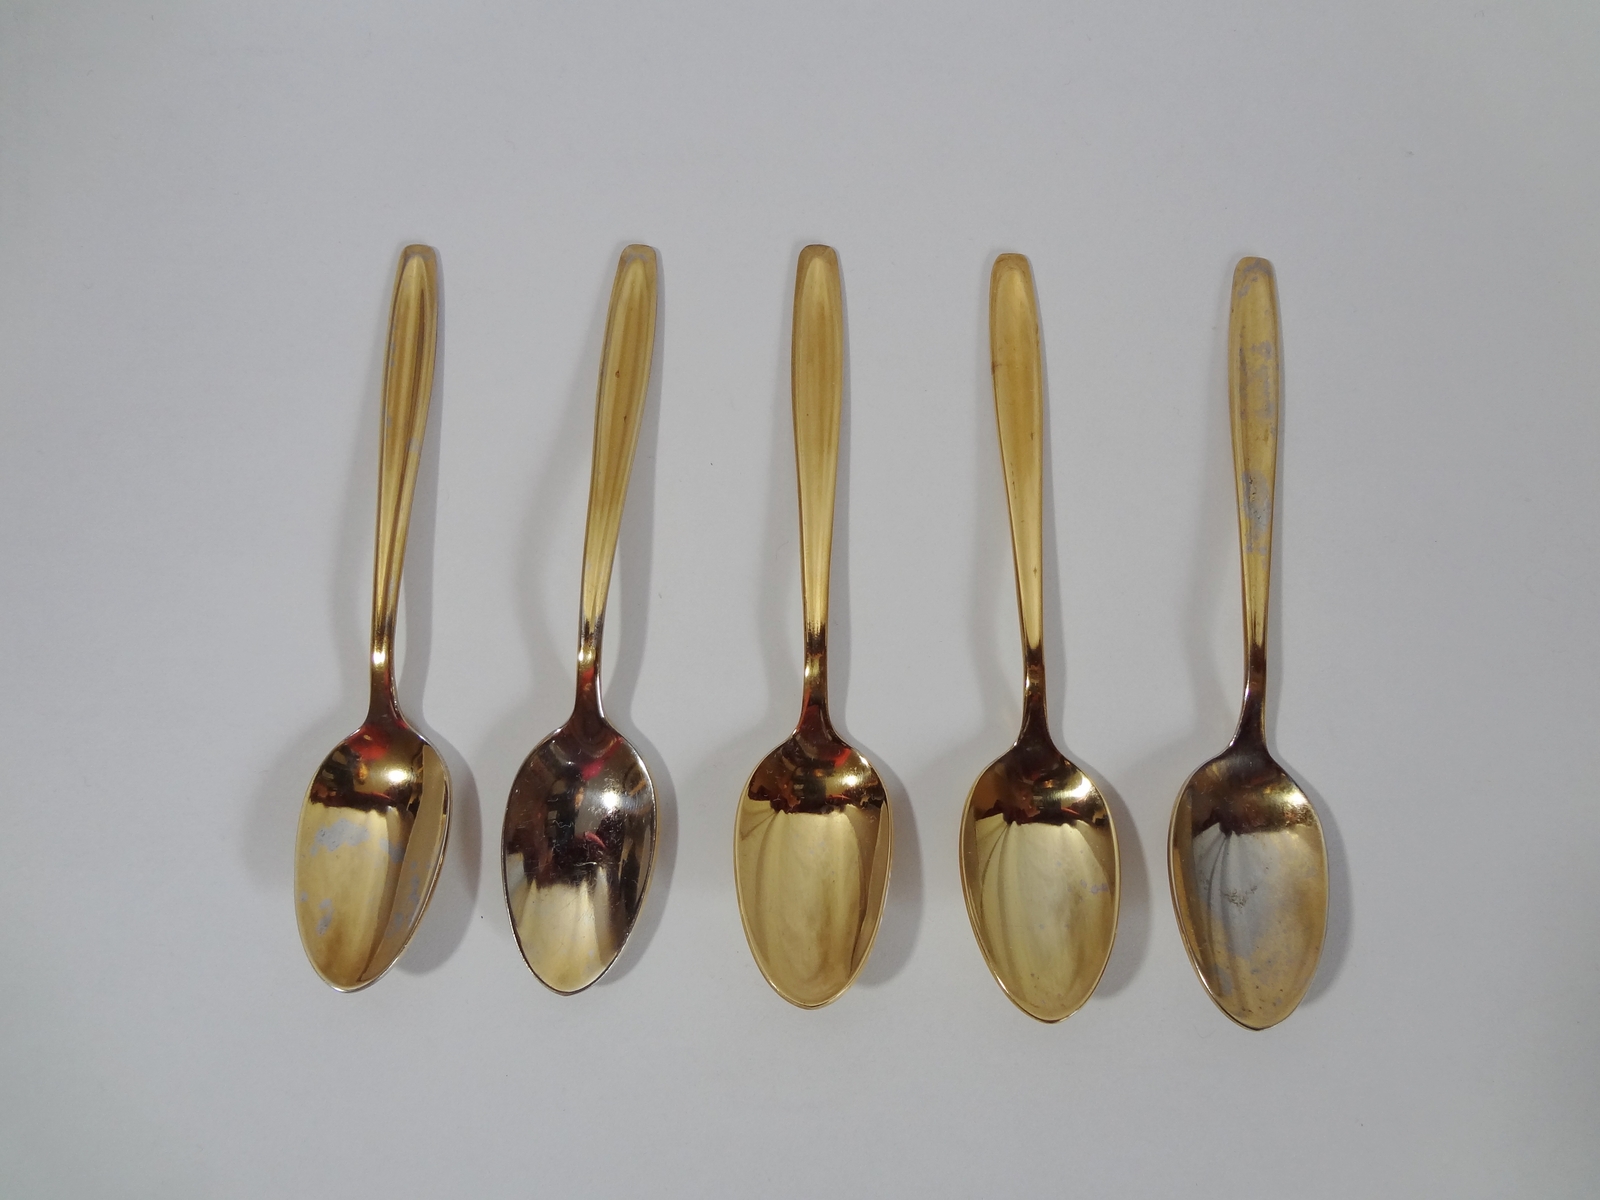 Insilco Stainless Spoons Set of 5 Tableware Cutlery Flatware  - $1.49